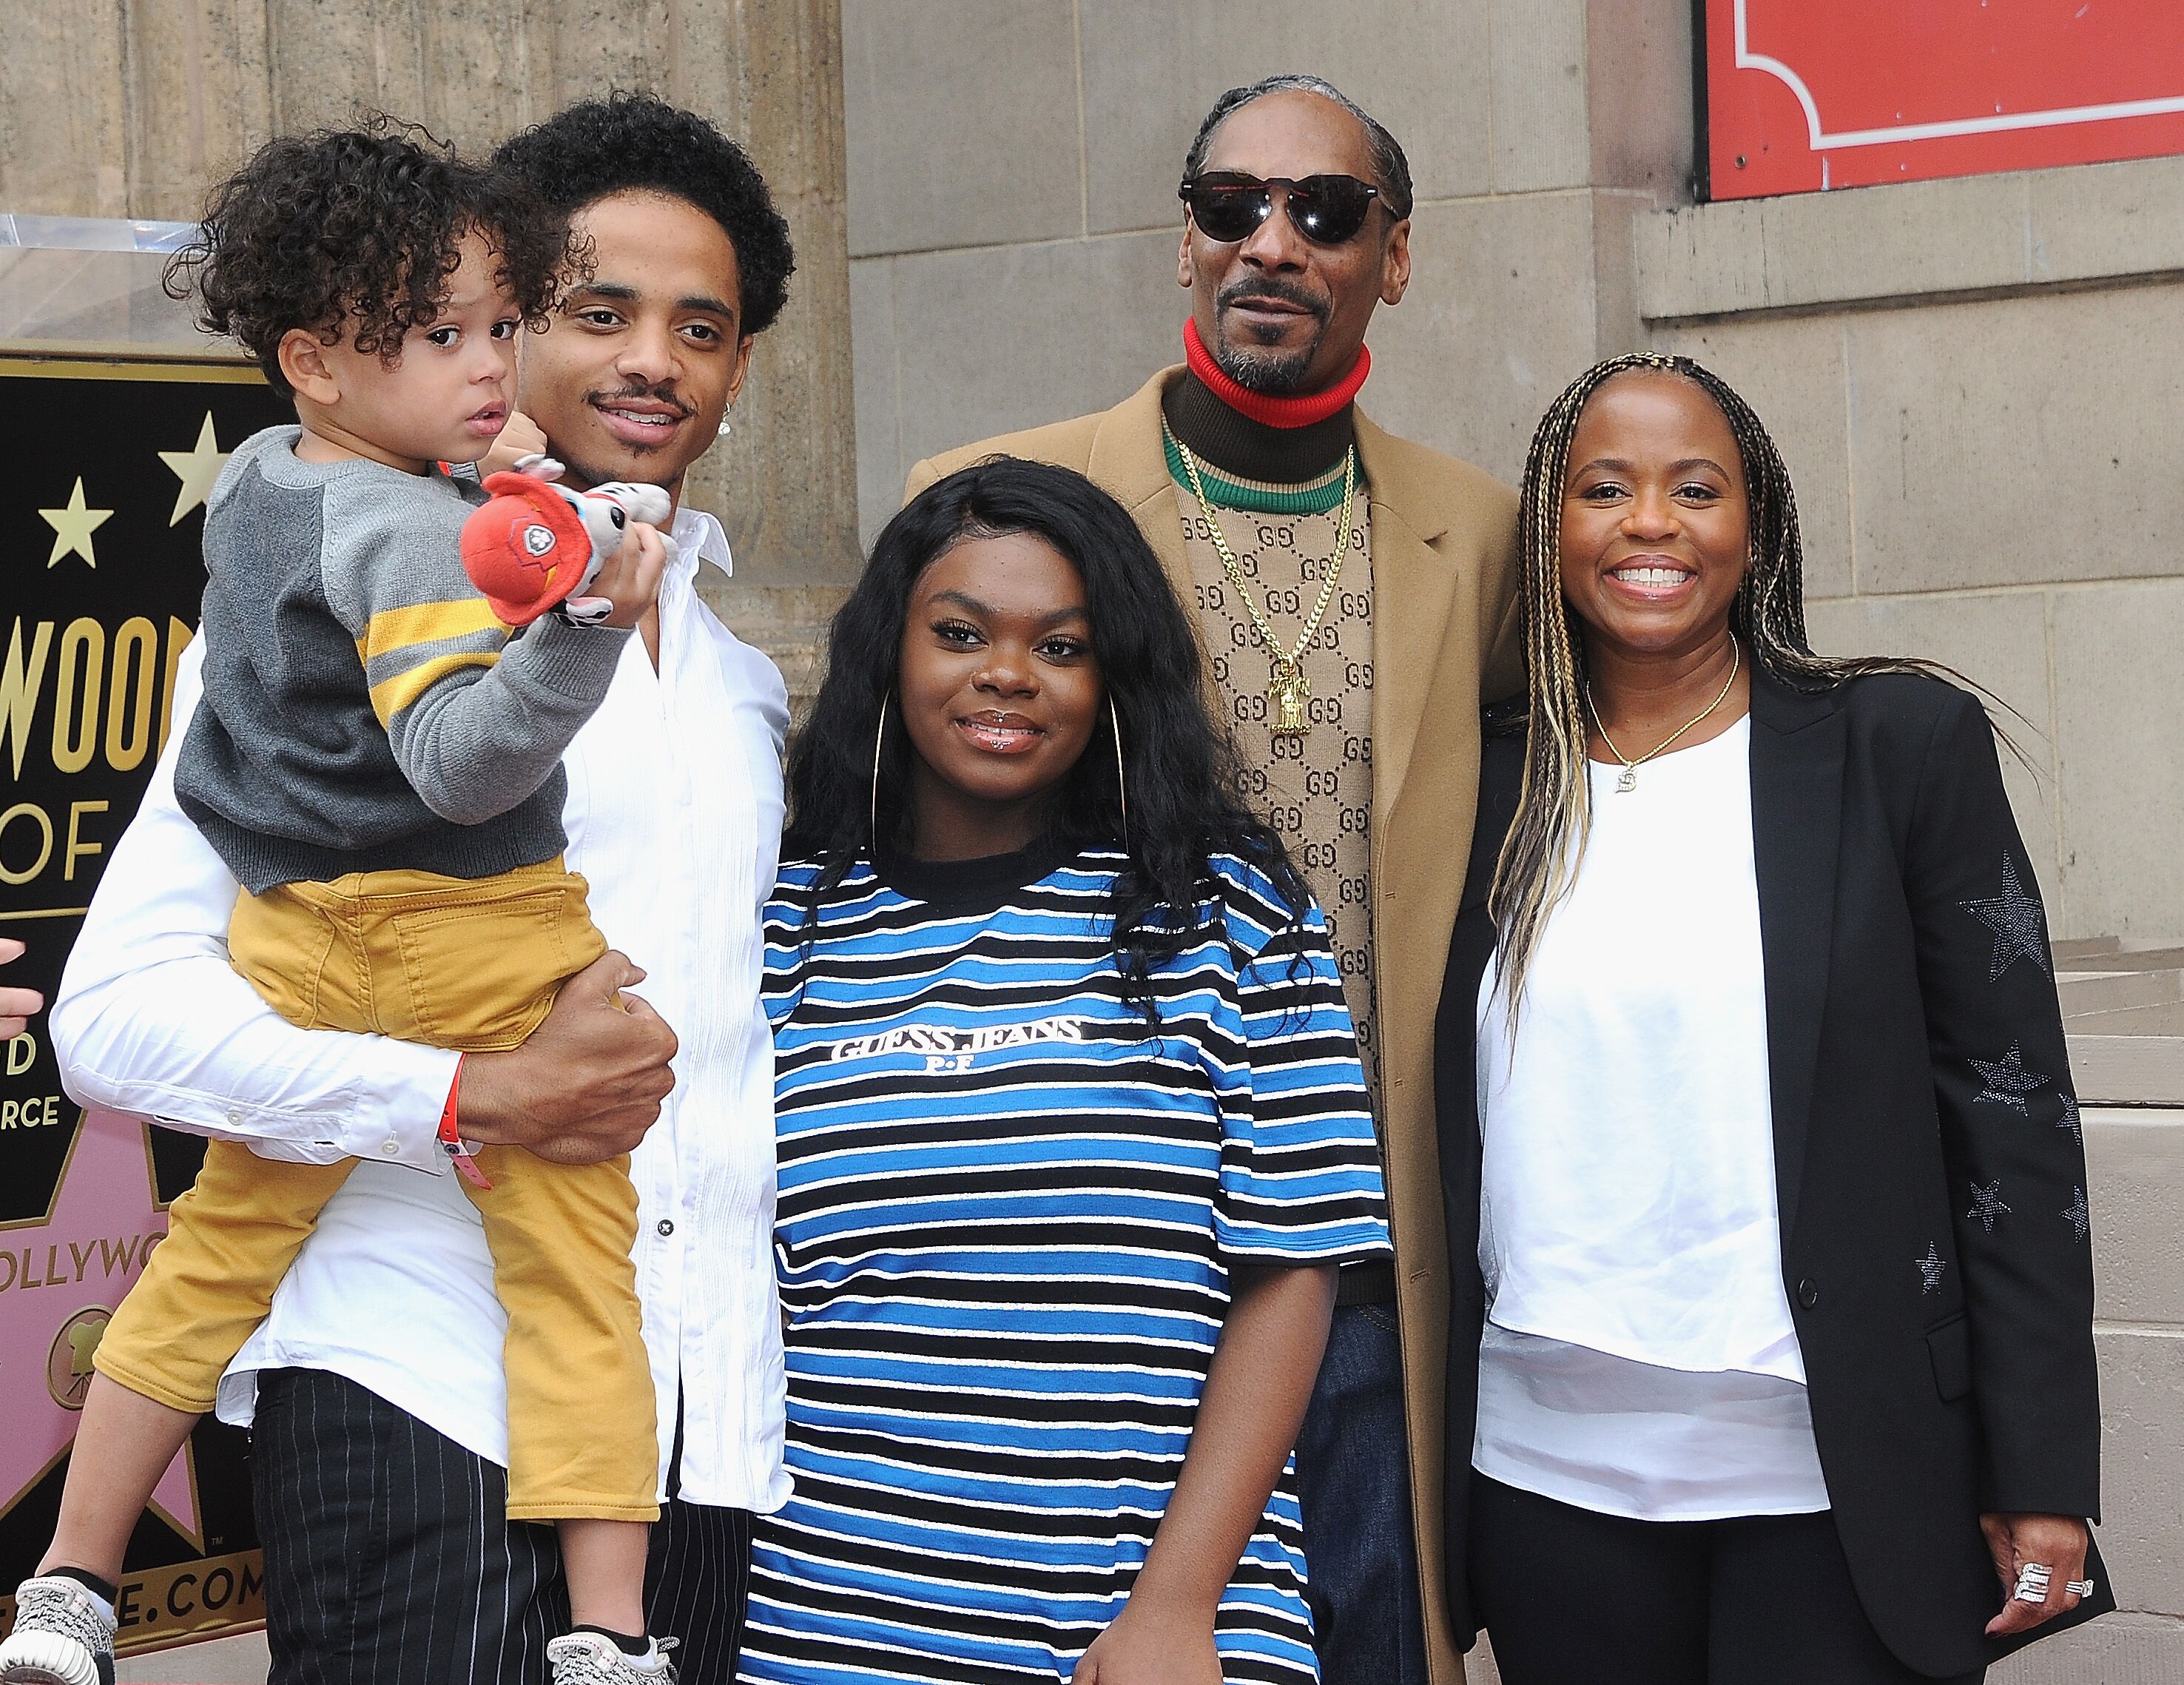 Snoop Dogg and his family on the Hollywood Walk of Fame/ Source: Getty Images